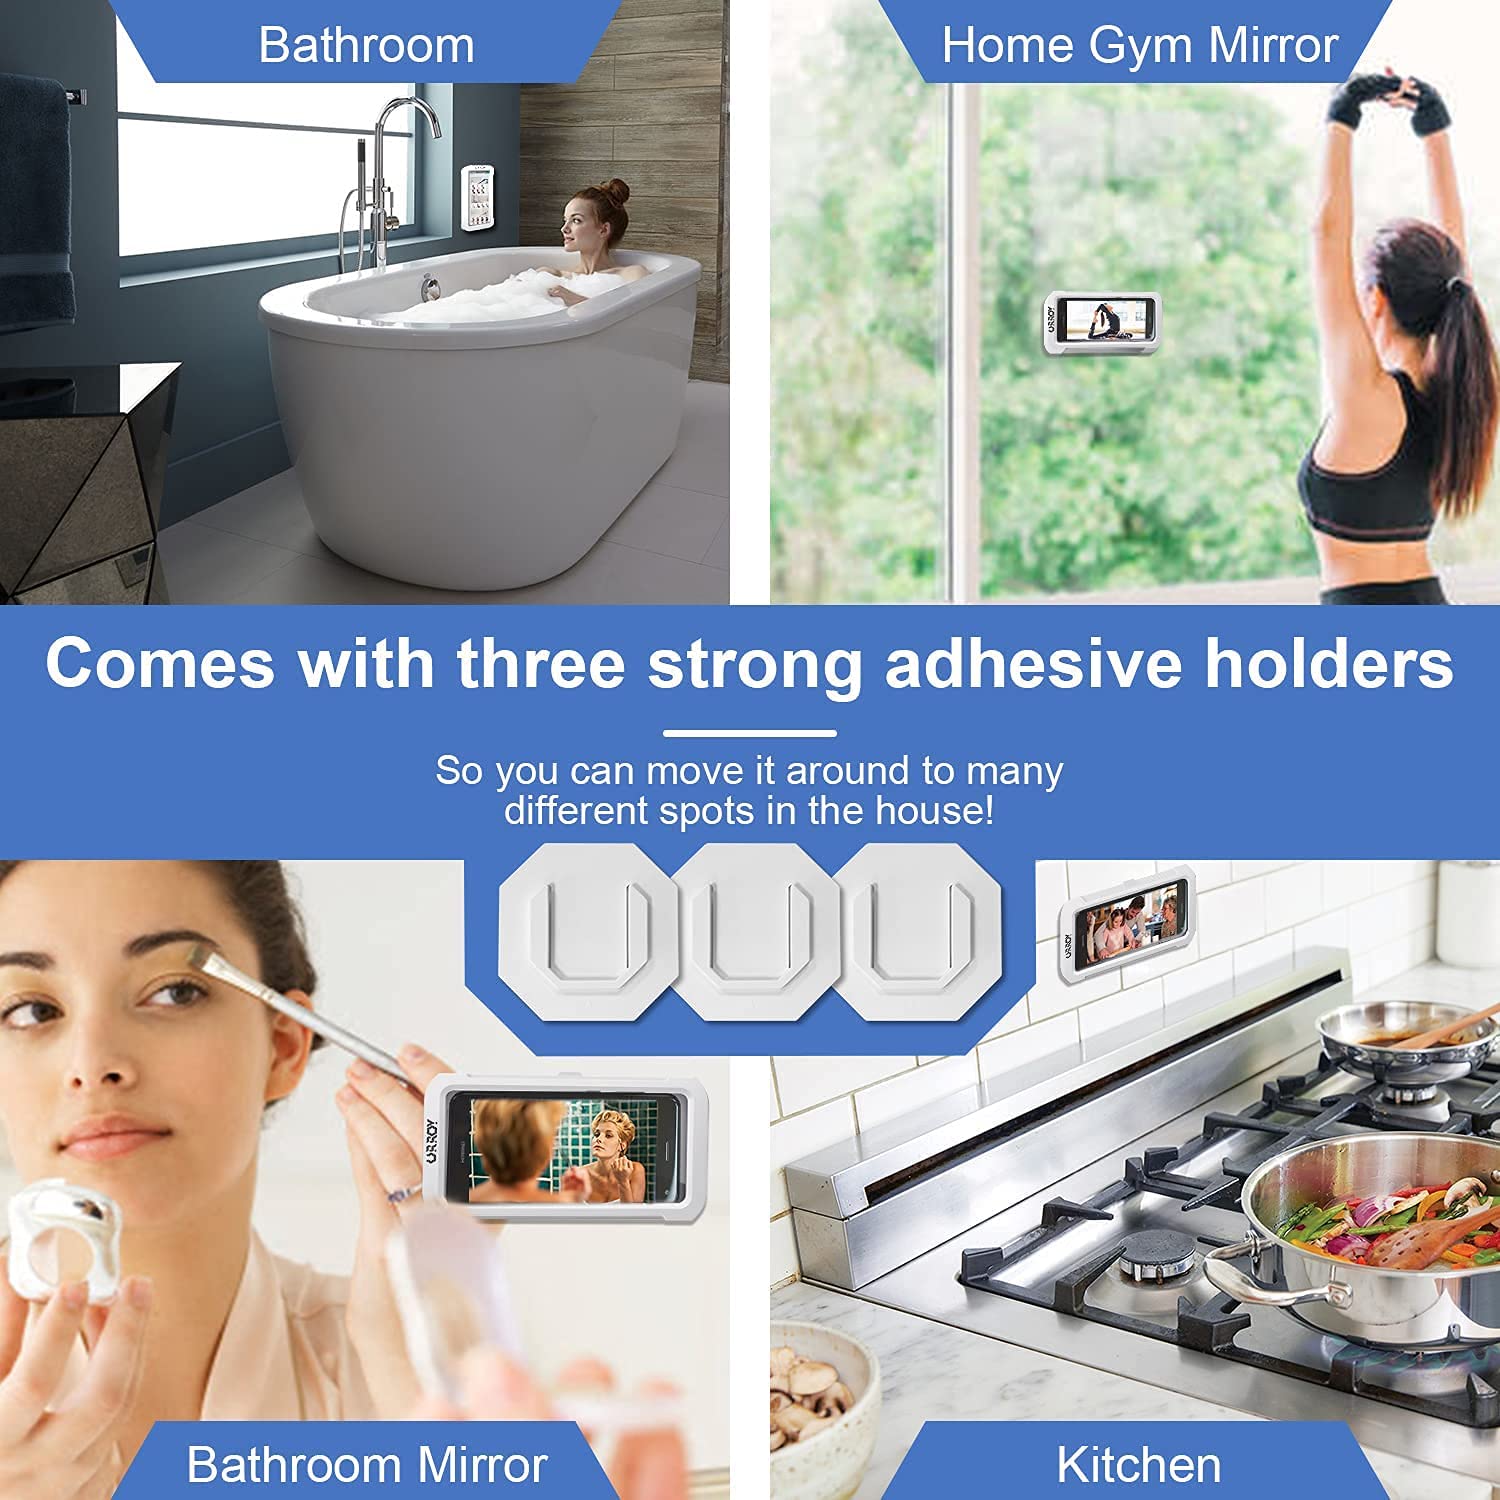 Waterproof Shower Phone Holder, 360° Rotation Shower Phone Case, Anti-Fog High Sensitivity Cover Mount Box for Bathroom Wall Mirror Bathtub Kitchen, Compatible with 4" - 7" Cell Phones